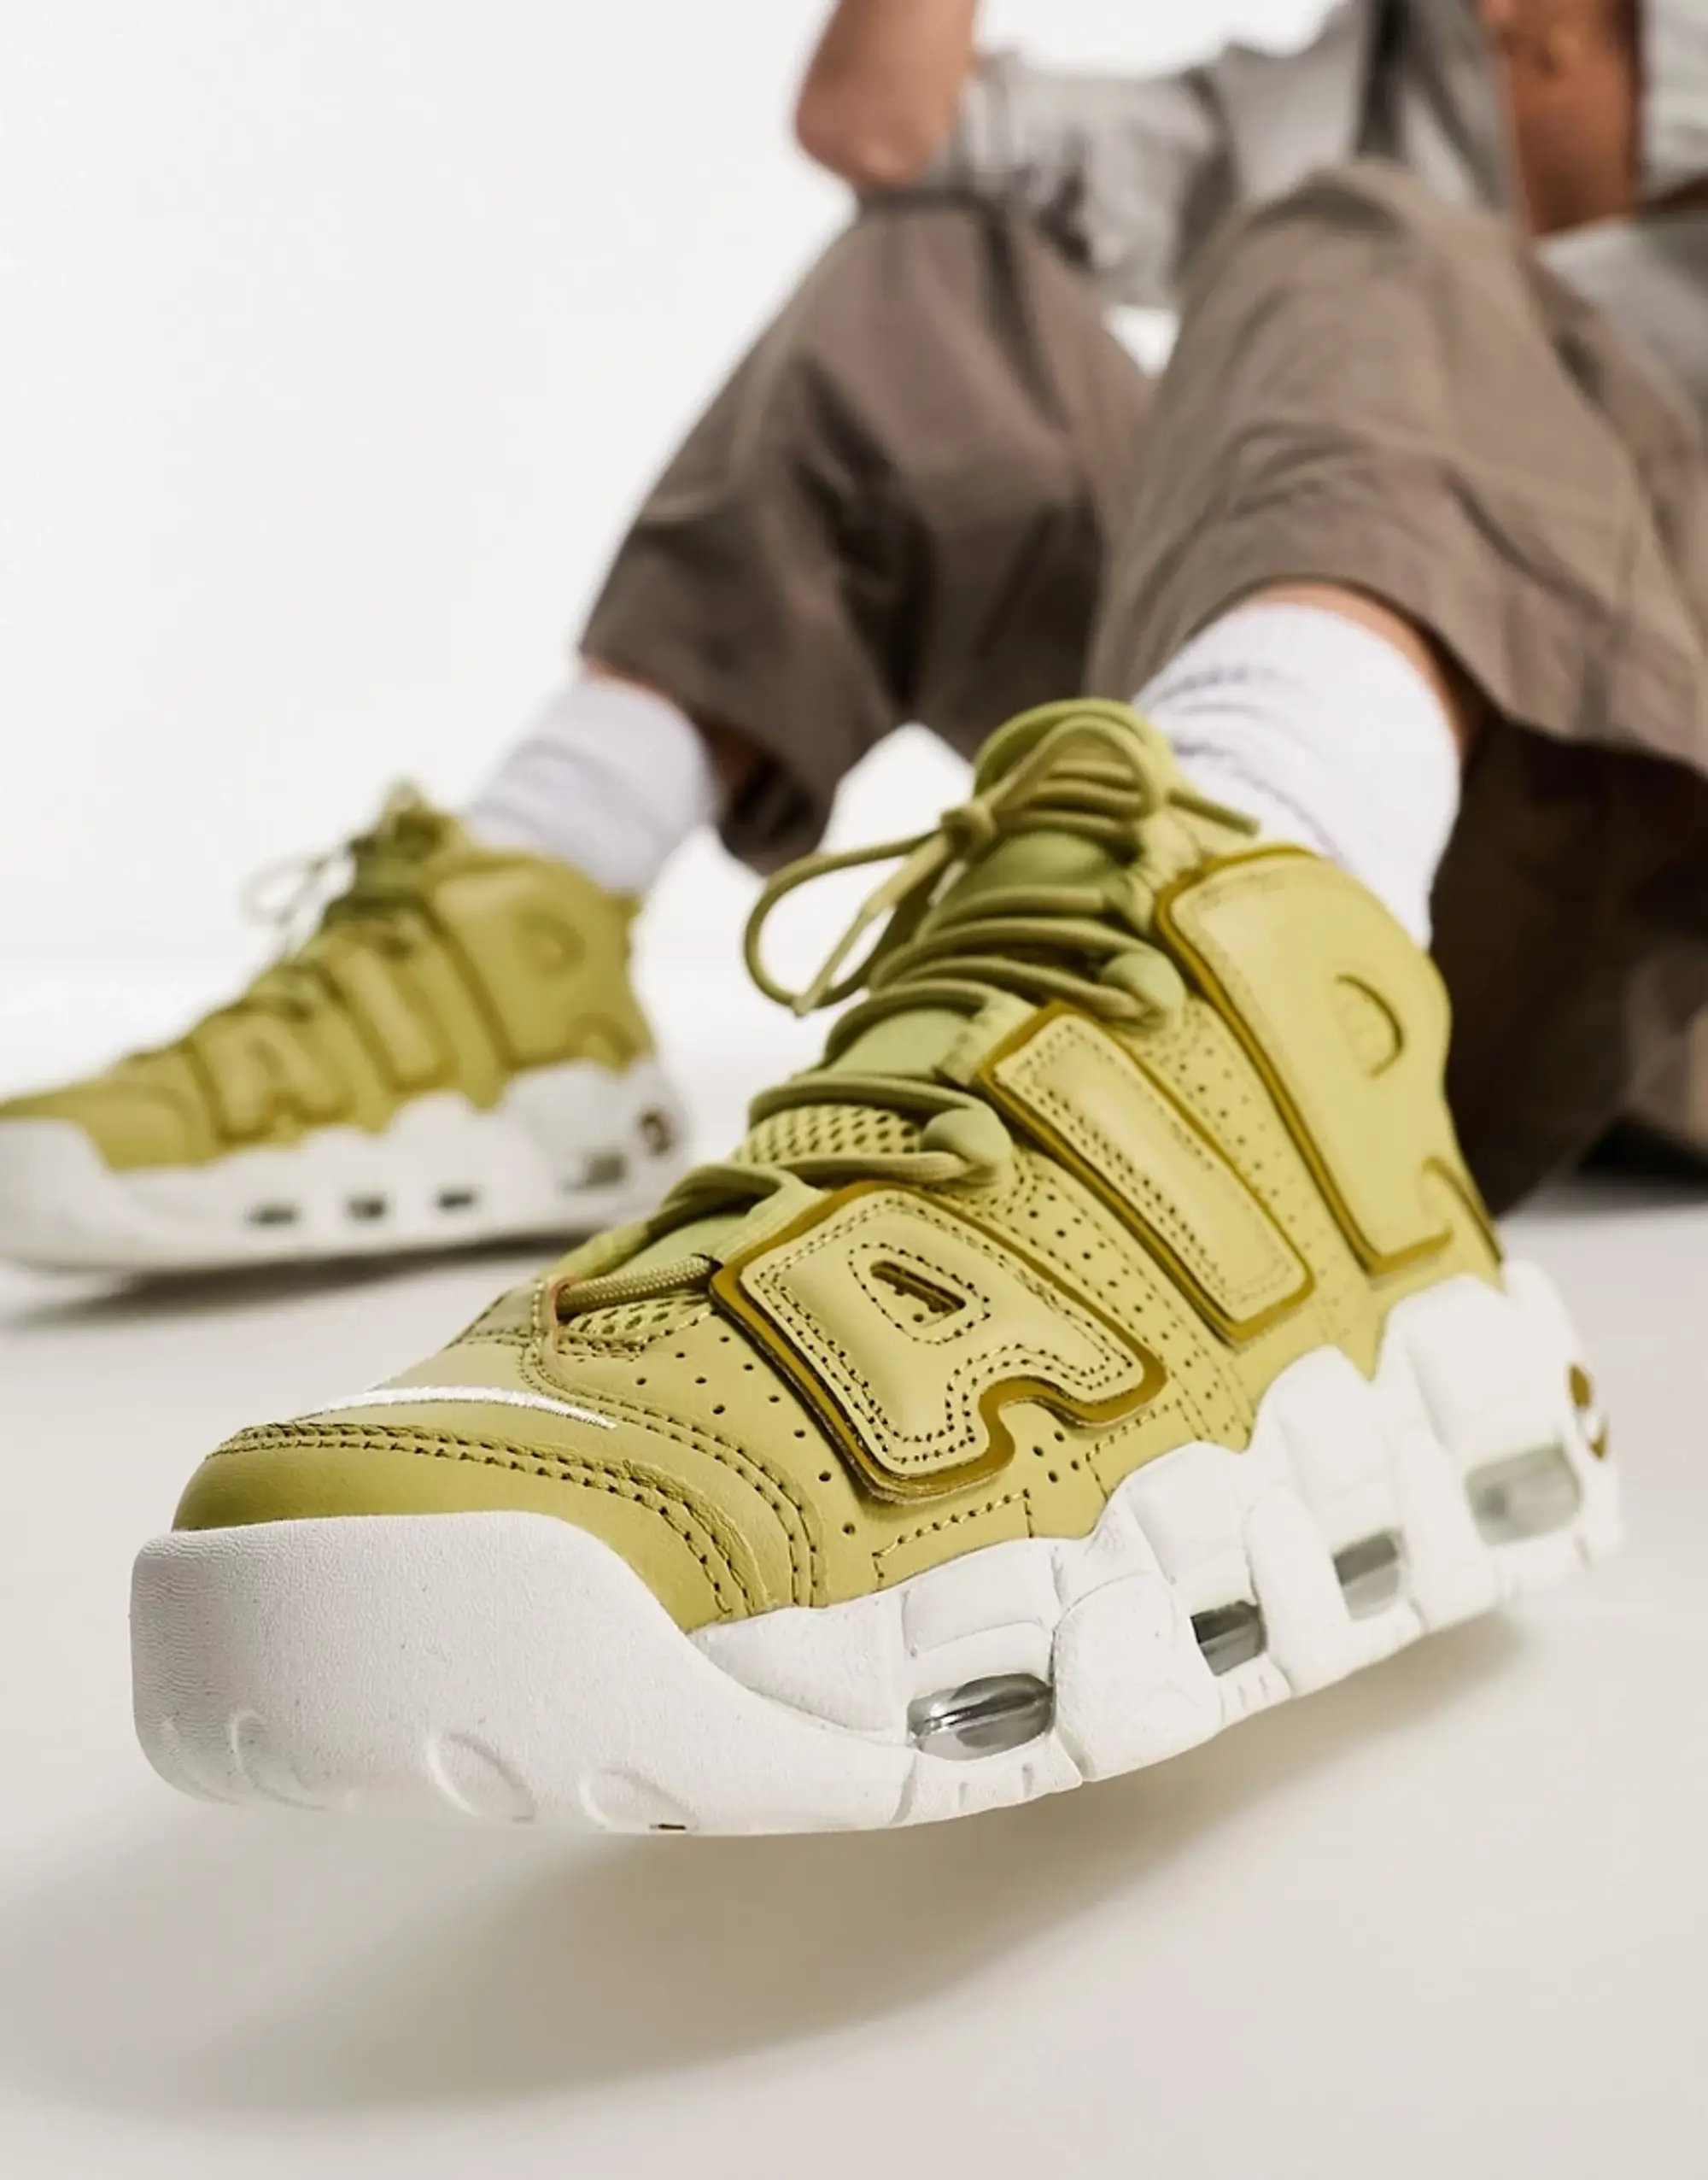 Nike Air More Uptempo Trainers In Buff Gold And Bronze